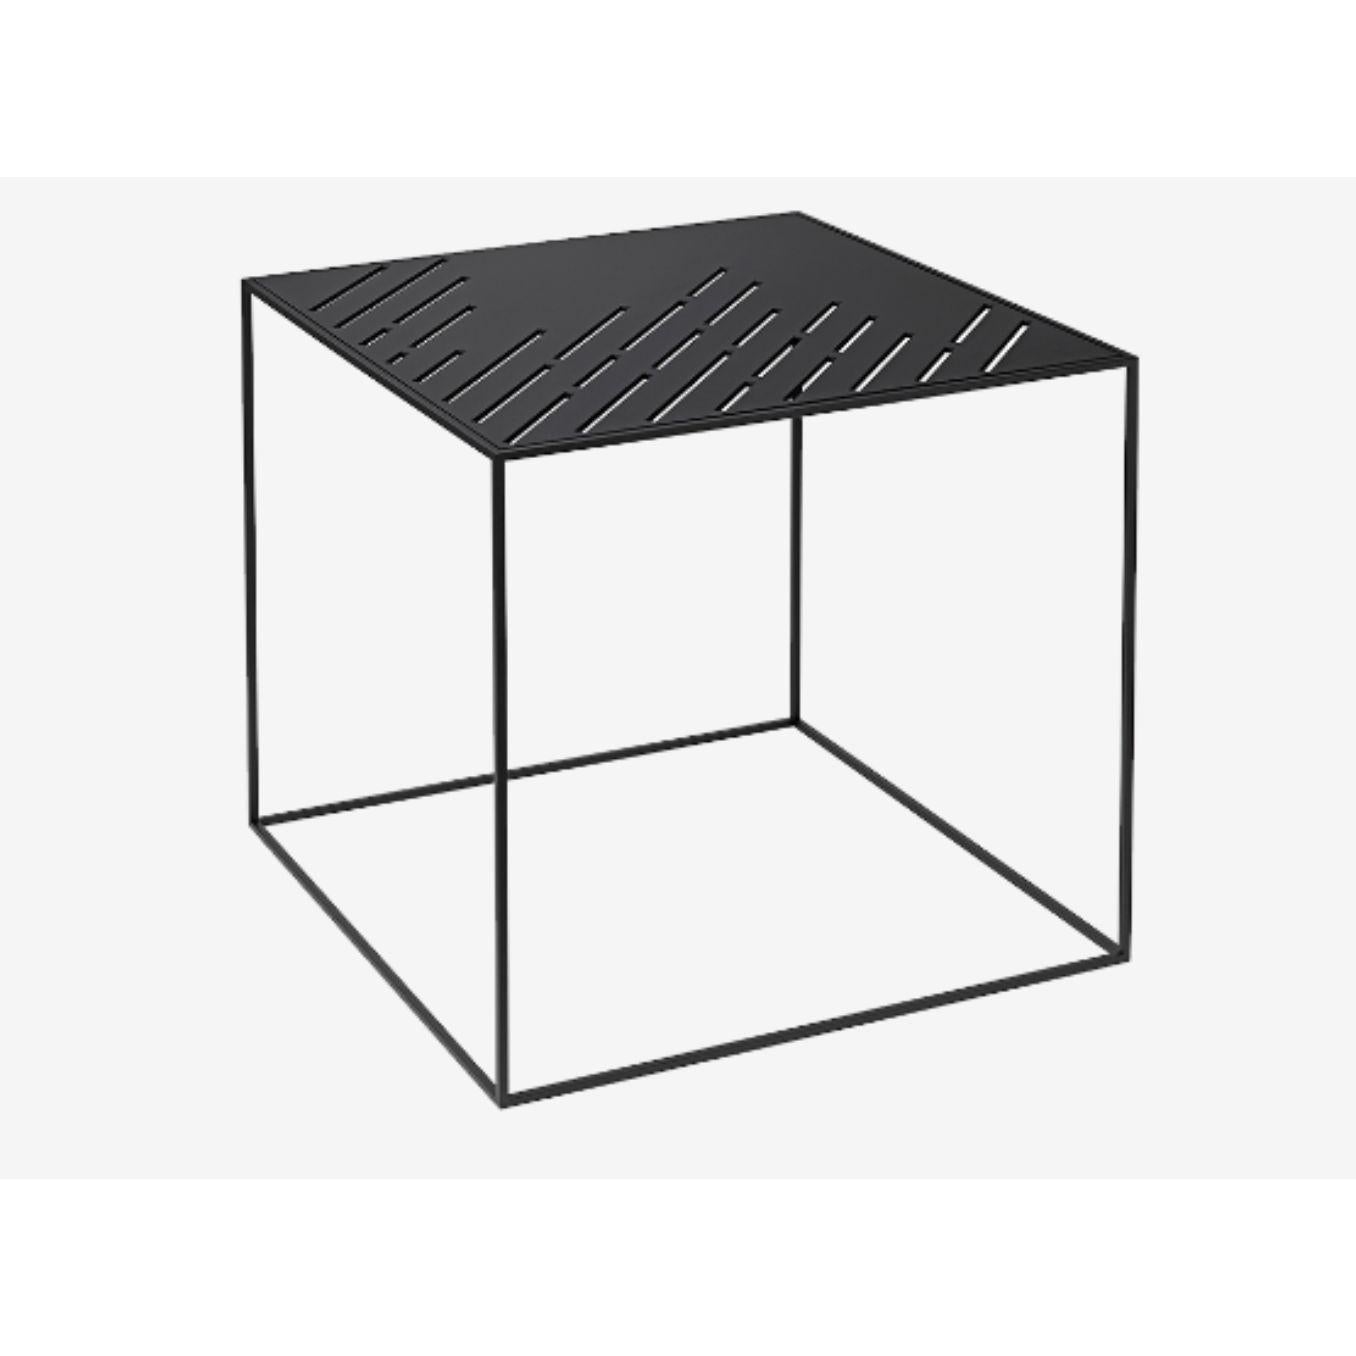 42 Perforated twin table by Lassen
Dimensions: w 42 x d 42 x h 0.5 cm 
Materials: Finér, Melamin, Melamin, Melamine, Metal, Veneer, Oak
Also available in different colors and dimensions. 

With an uncomplicated simplicity and a fond reference